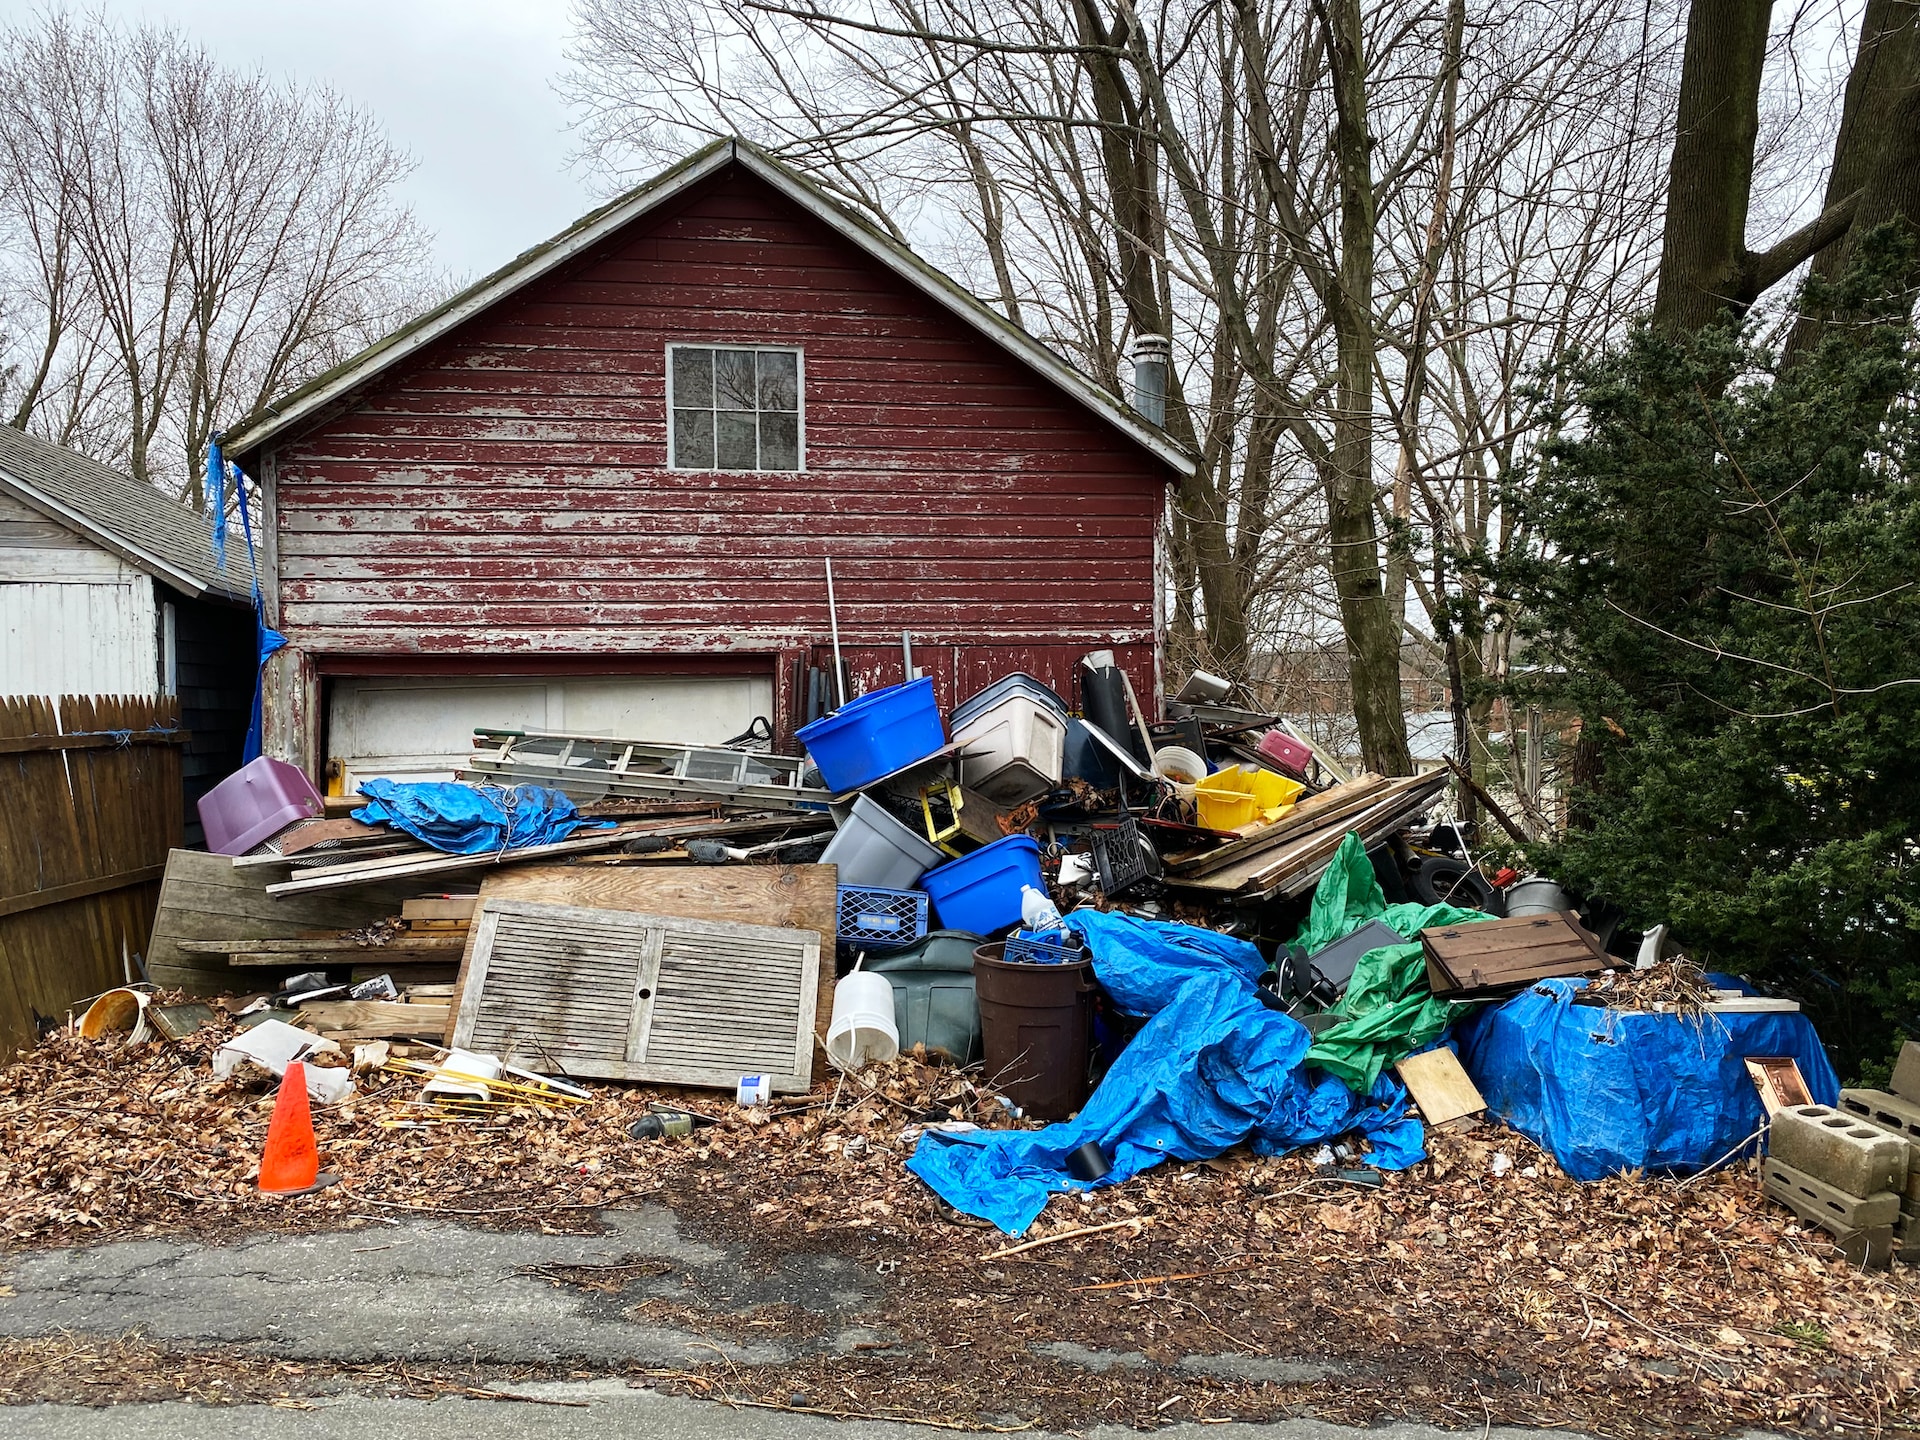 Hoarders house with cluttered yard